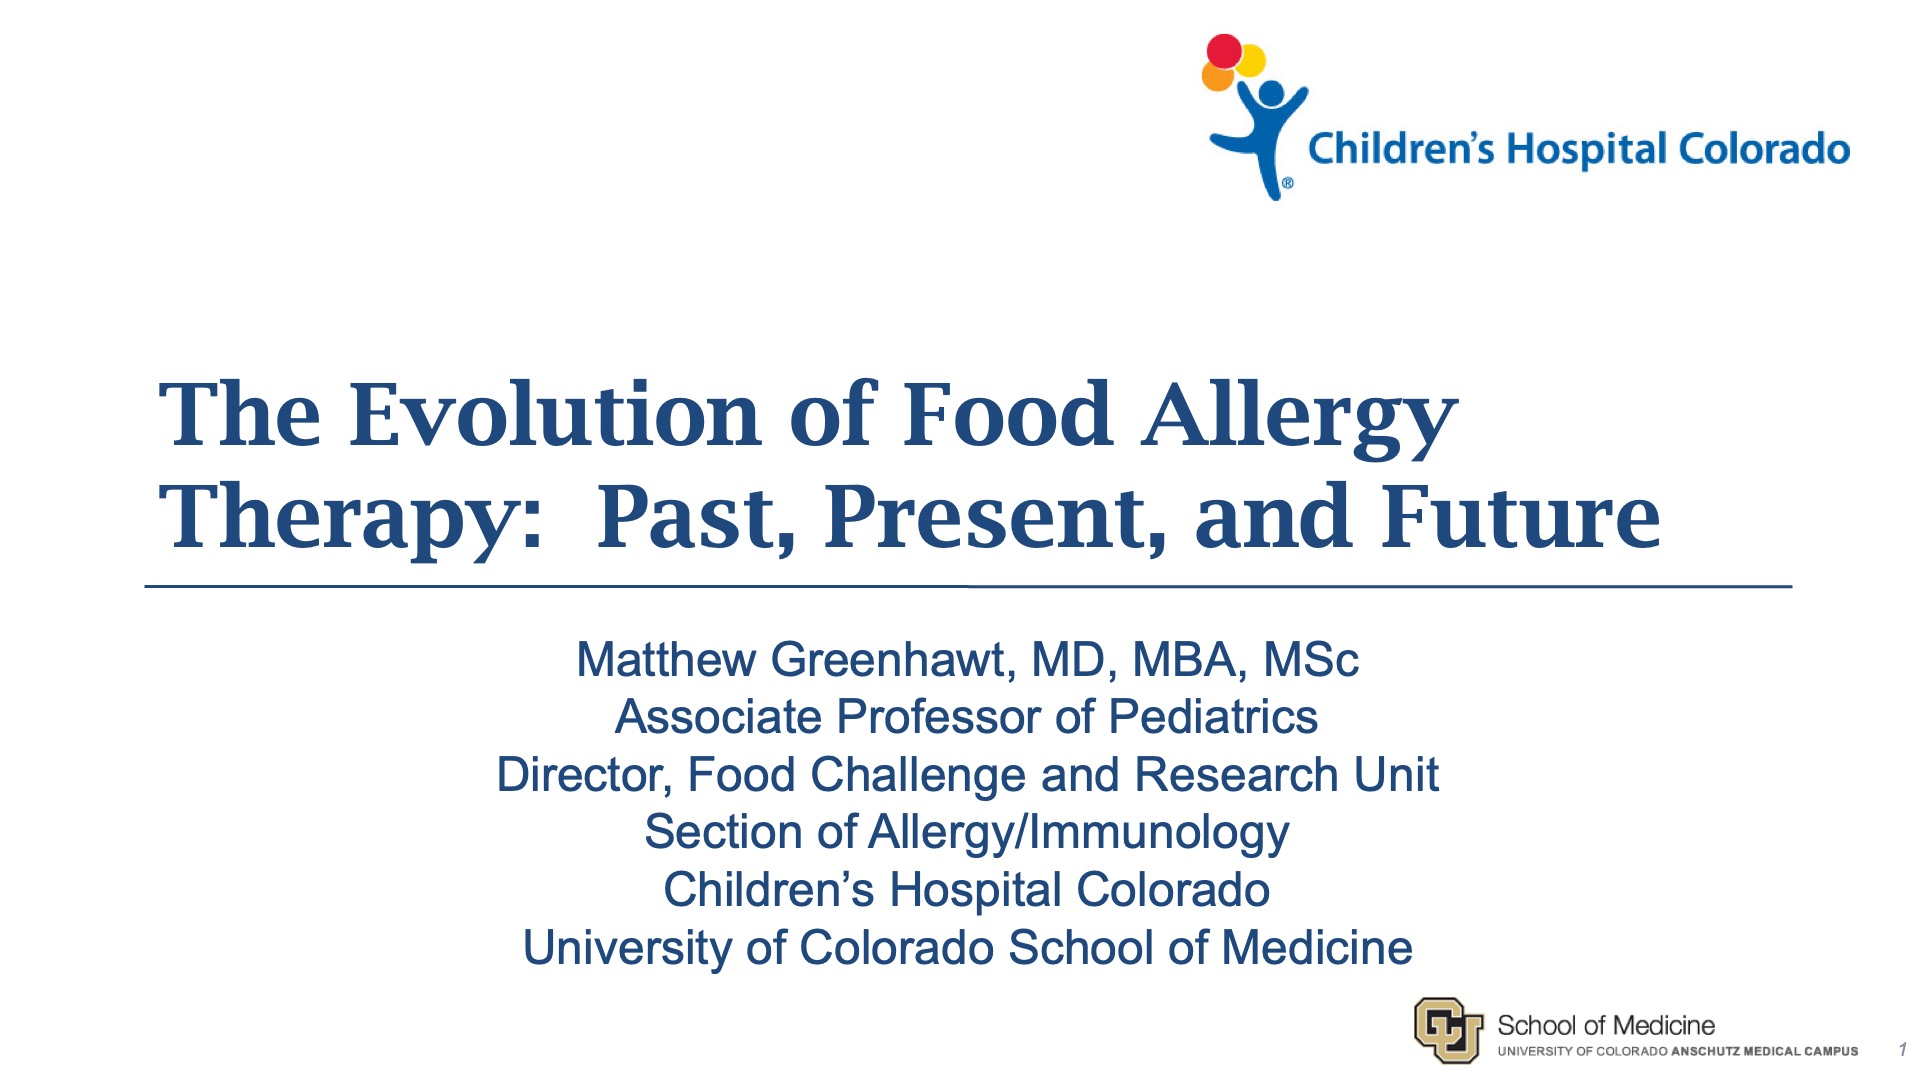 The Evolution of Food Allergy Therapy: Past, Present, and Future